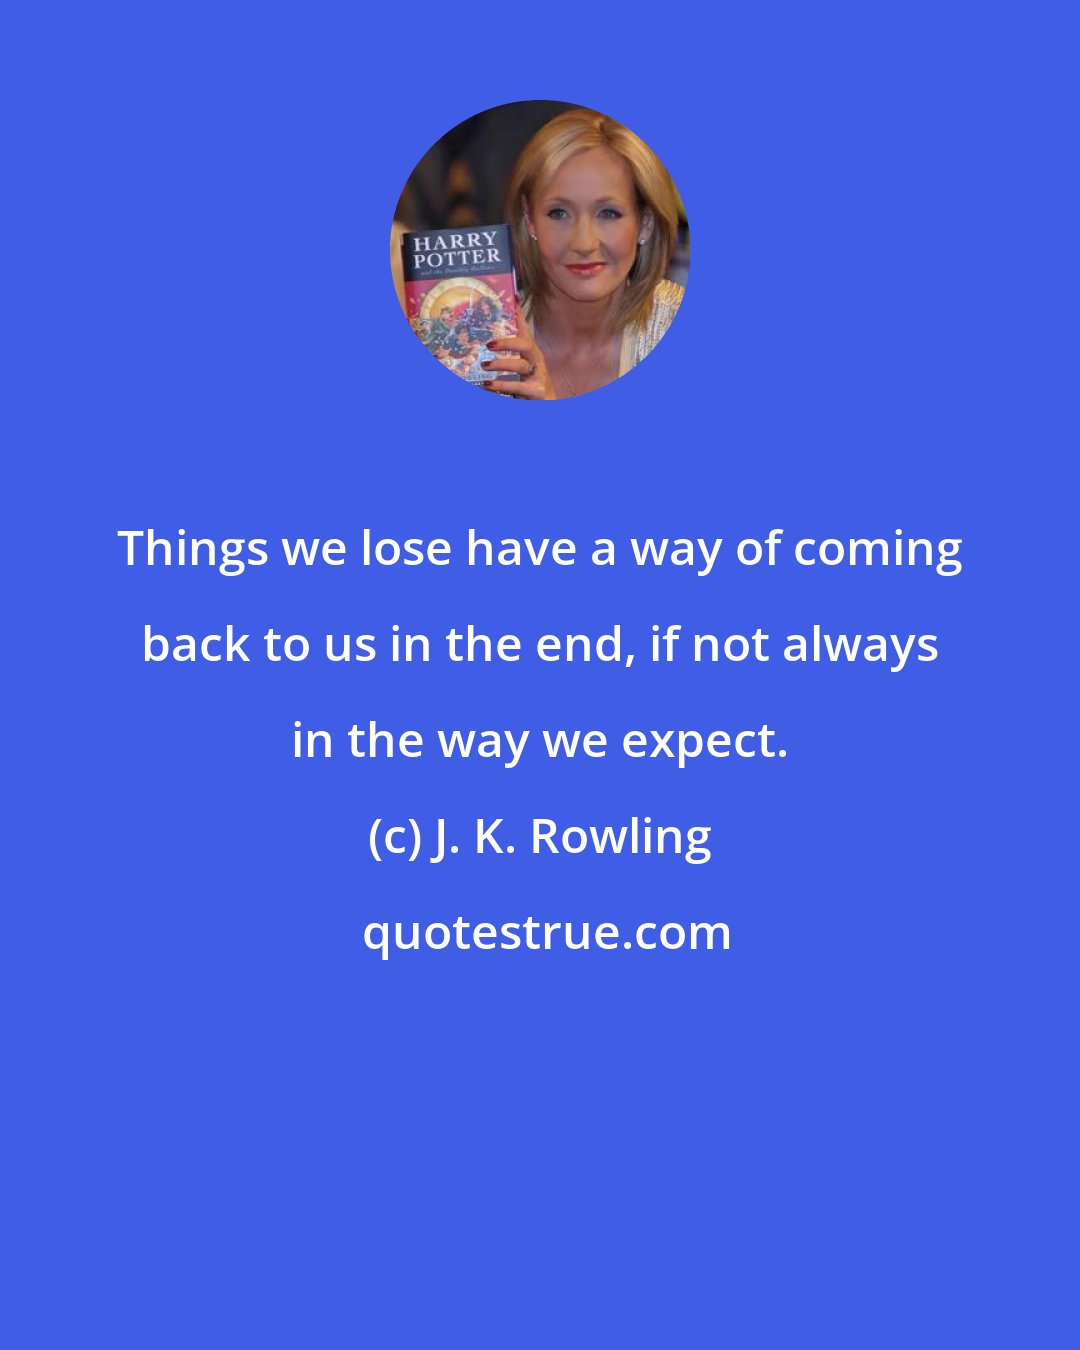 J. K. Rowling: Things we lose have a way of coming back to us in the end, if not always in the way we expect.